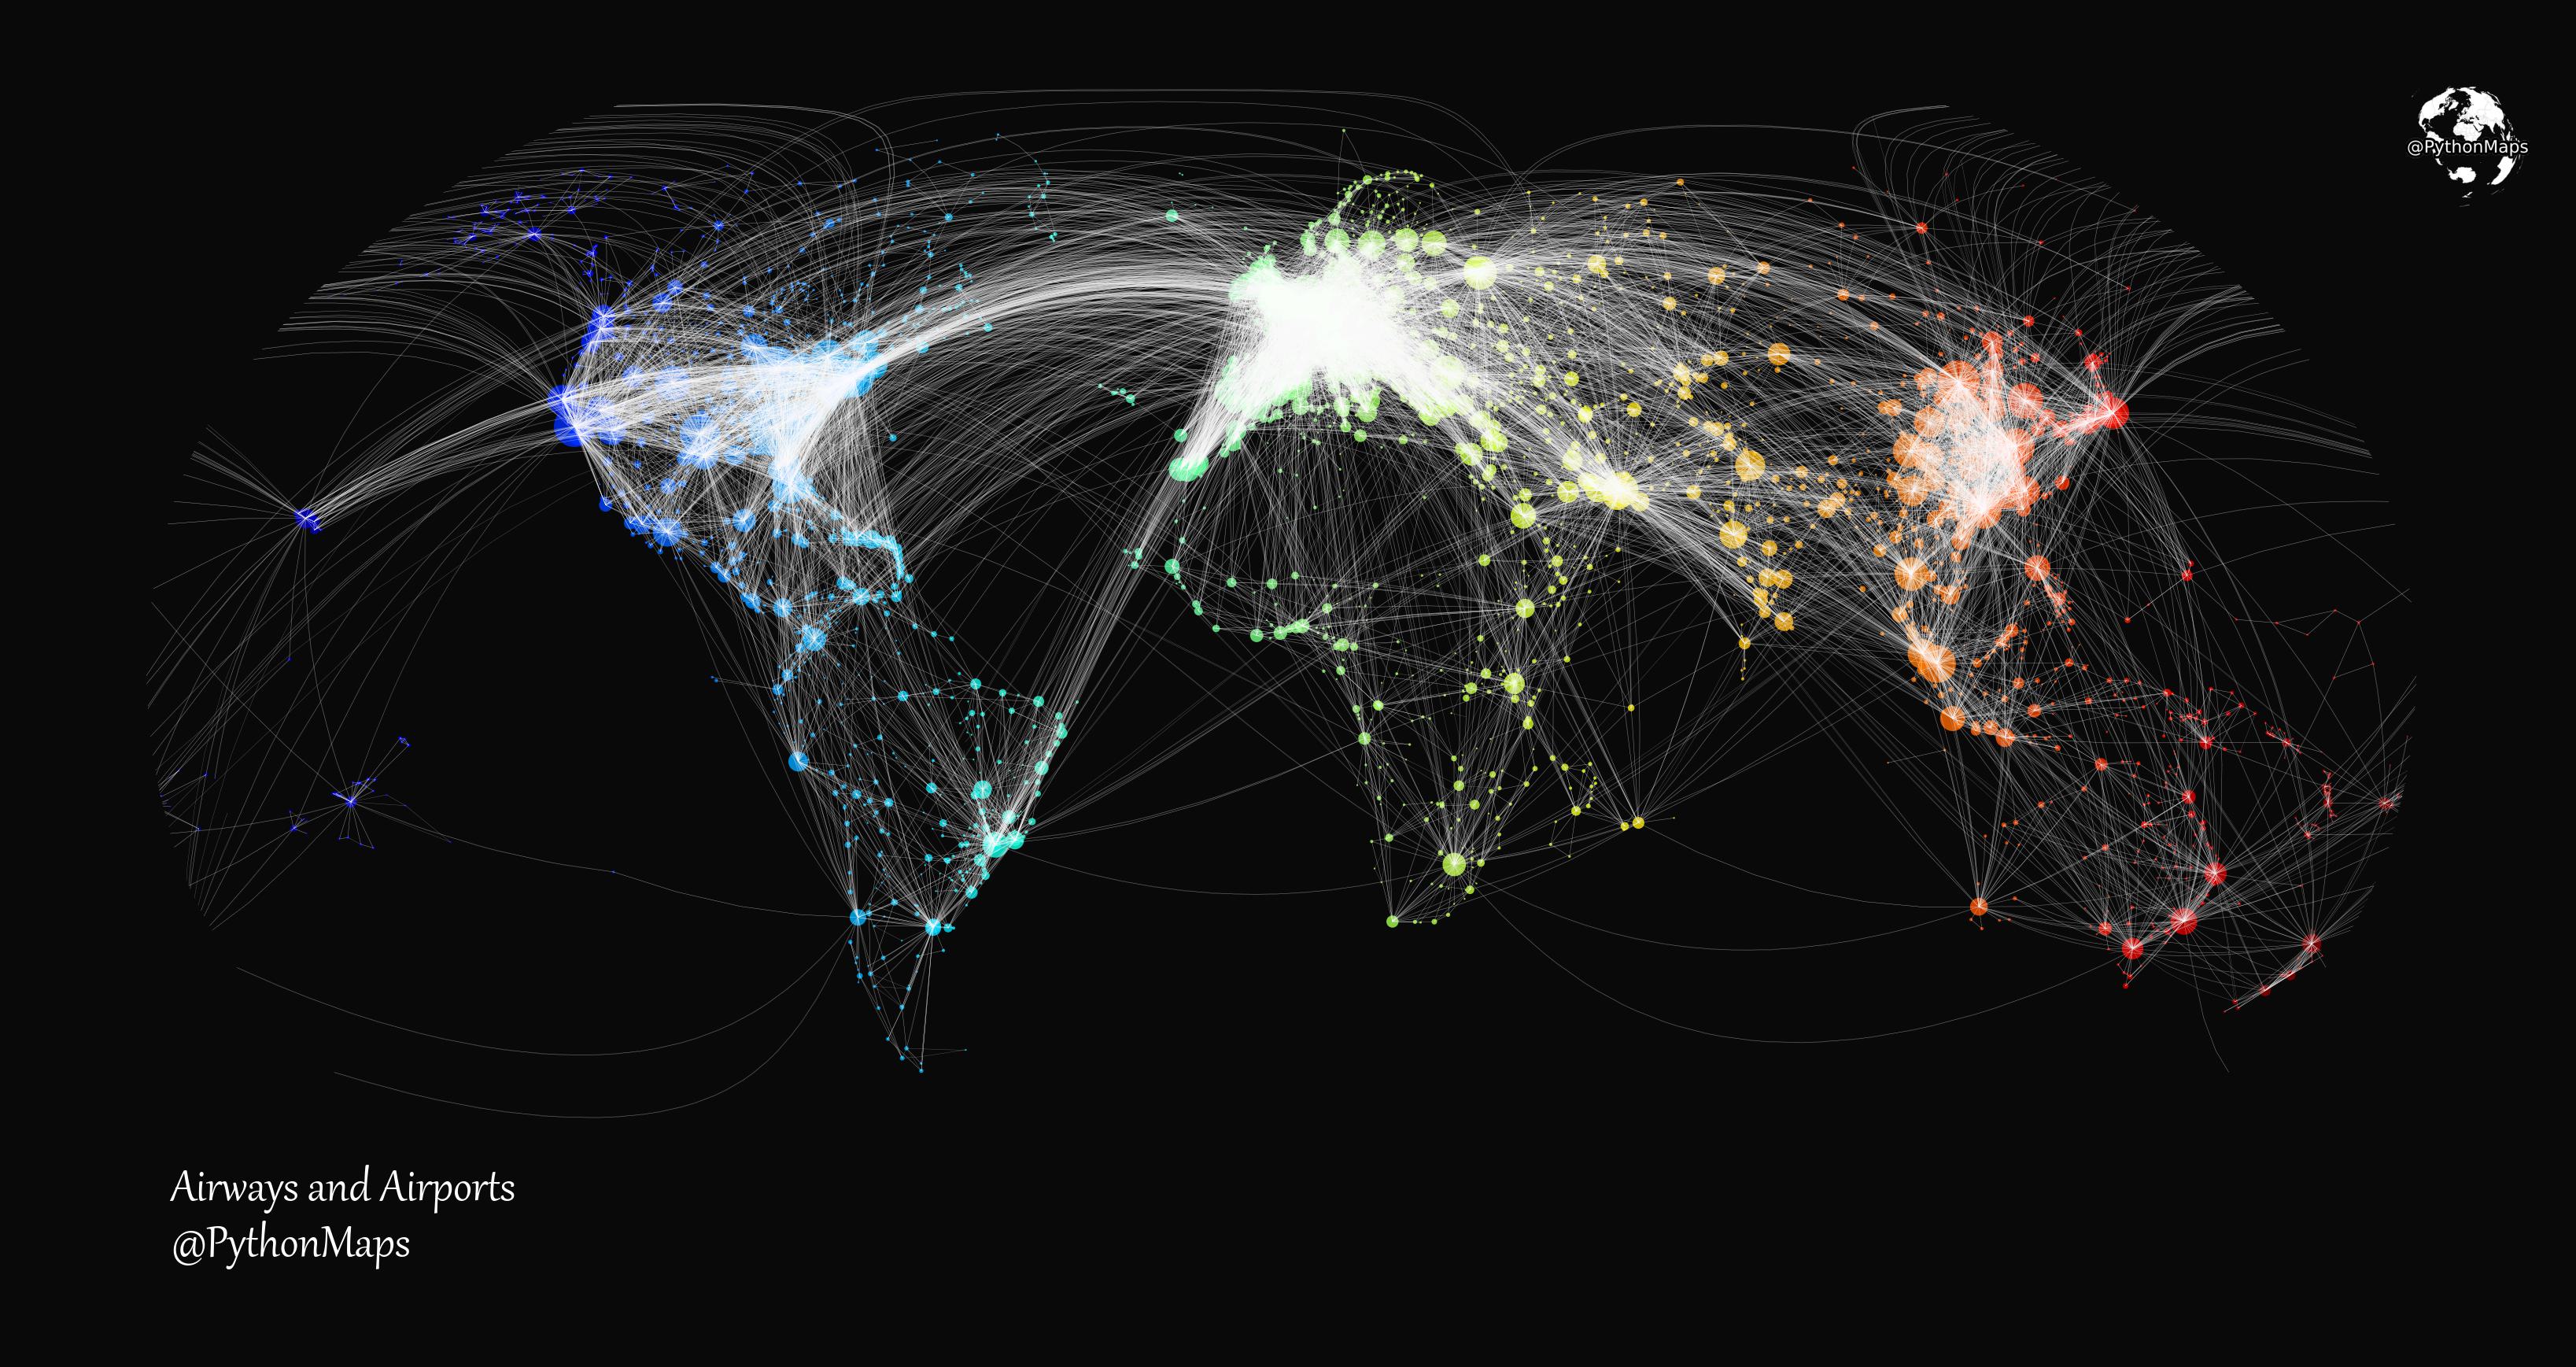 The World's Airports and Airways